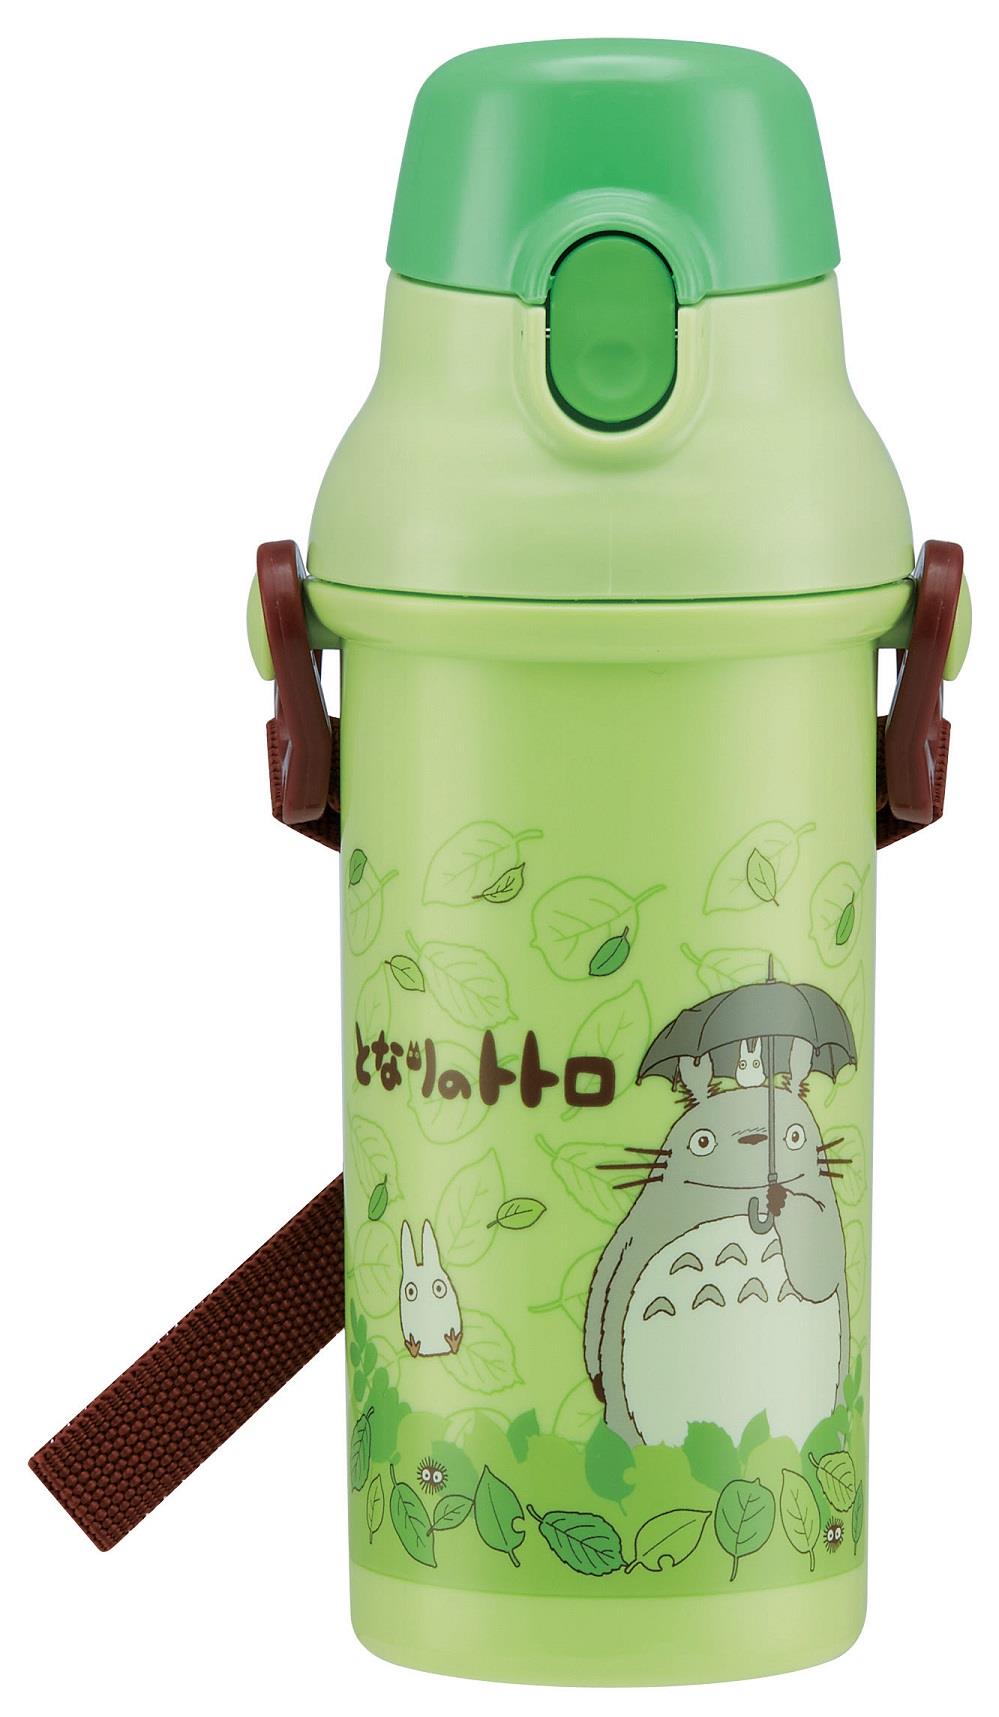 My Neighbour Totoro: Single-Touch Totoro Small Water Bottle